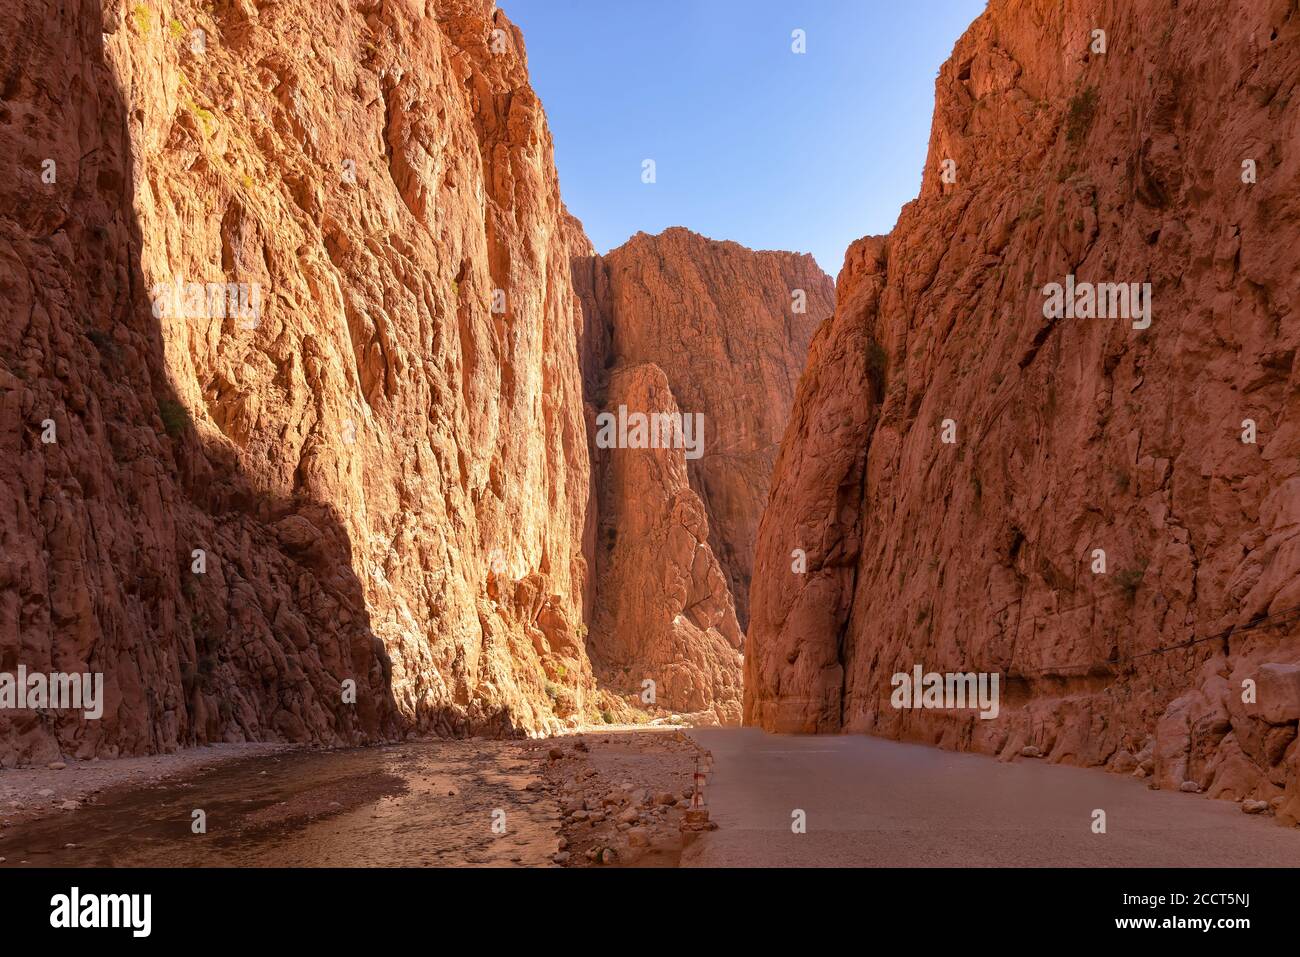 The Todgha gorge canyon near the town of Tinghir, Morocco. This series of limestone river canyons are in the eastern part of the High Atlas Mountains Stock Photo